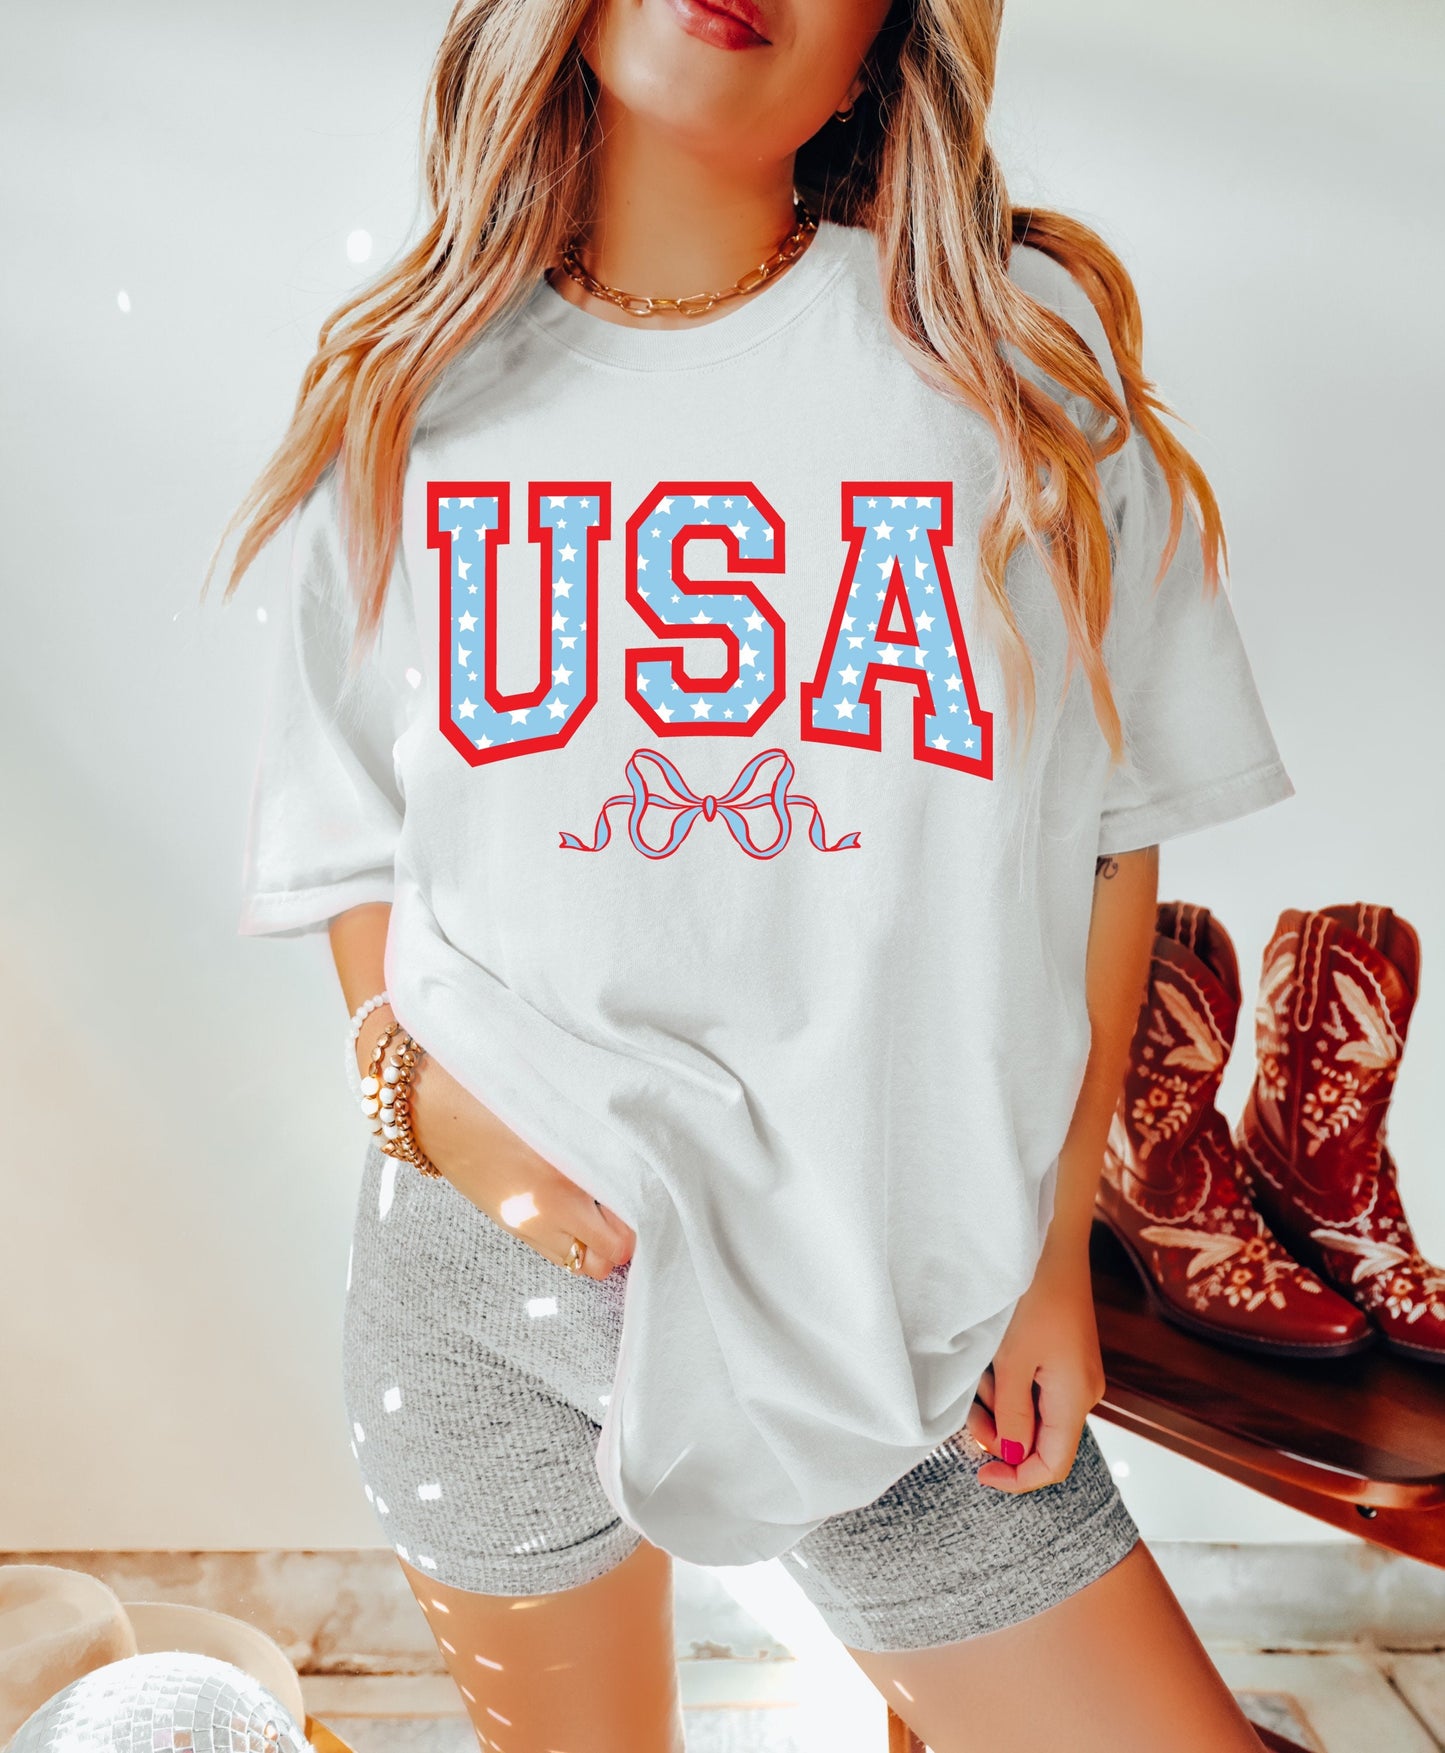 USA Coquette Bow July 4th Shirt, Coquette 4th of July Shirt, Retro 4th of July Shirt, Comfort Colors® Shirt, Summertime Tee Coquette Girly